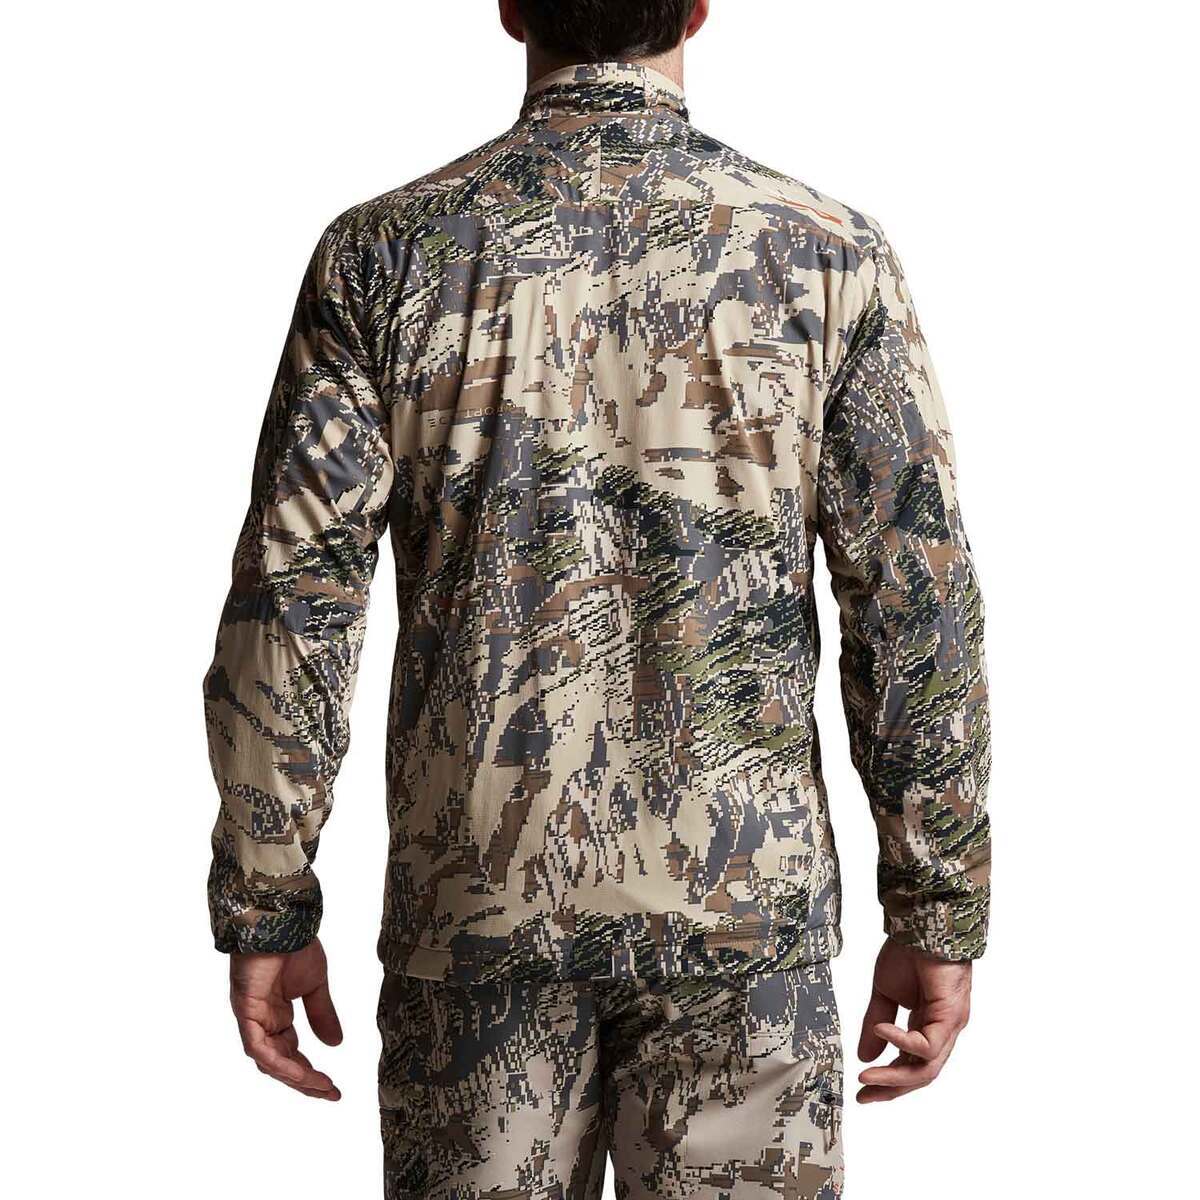 Sitka Ambient Jacket - Optifade Open Country | Sportsman's Warehouse